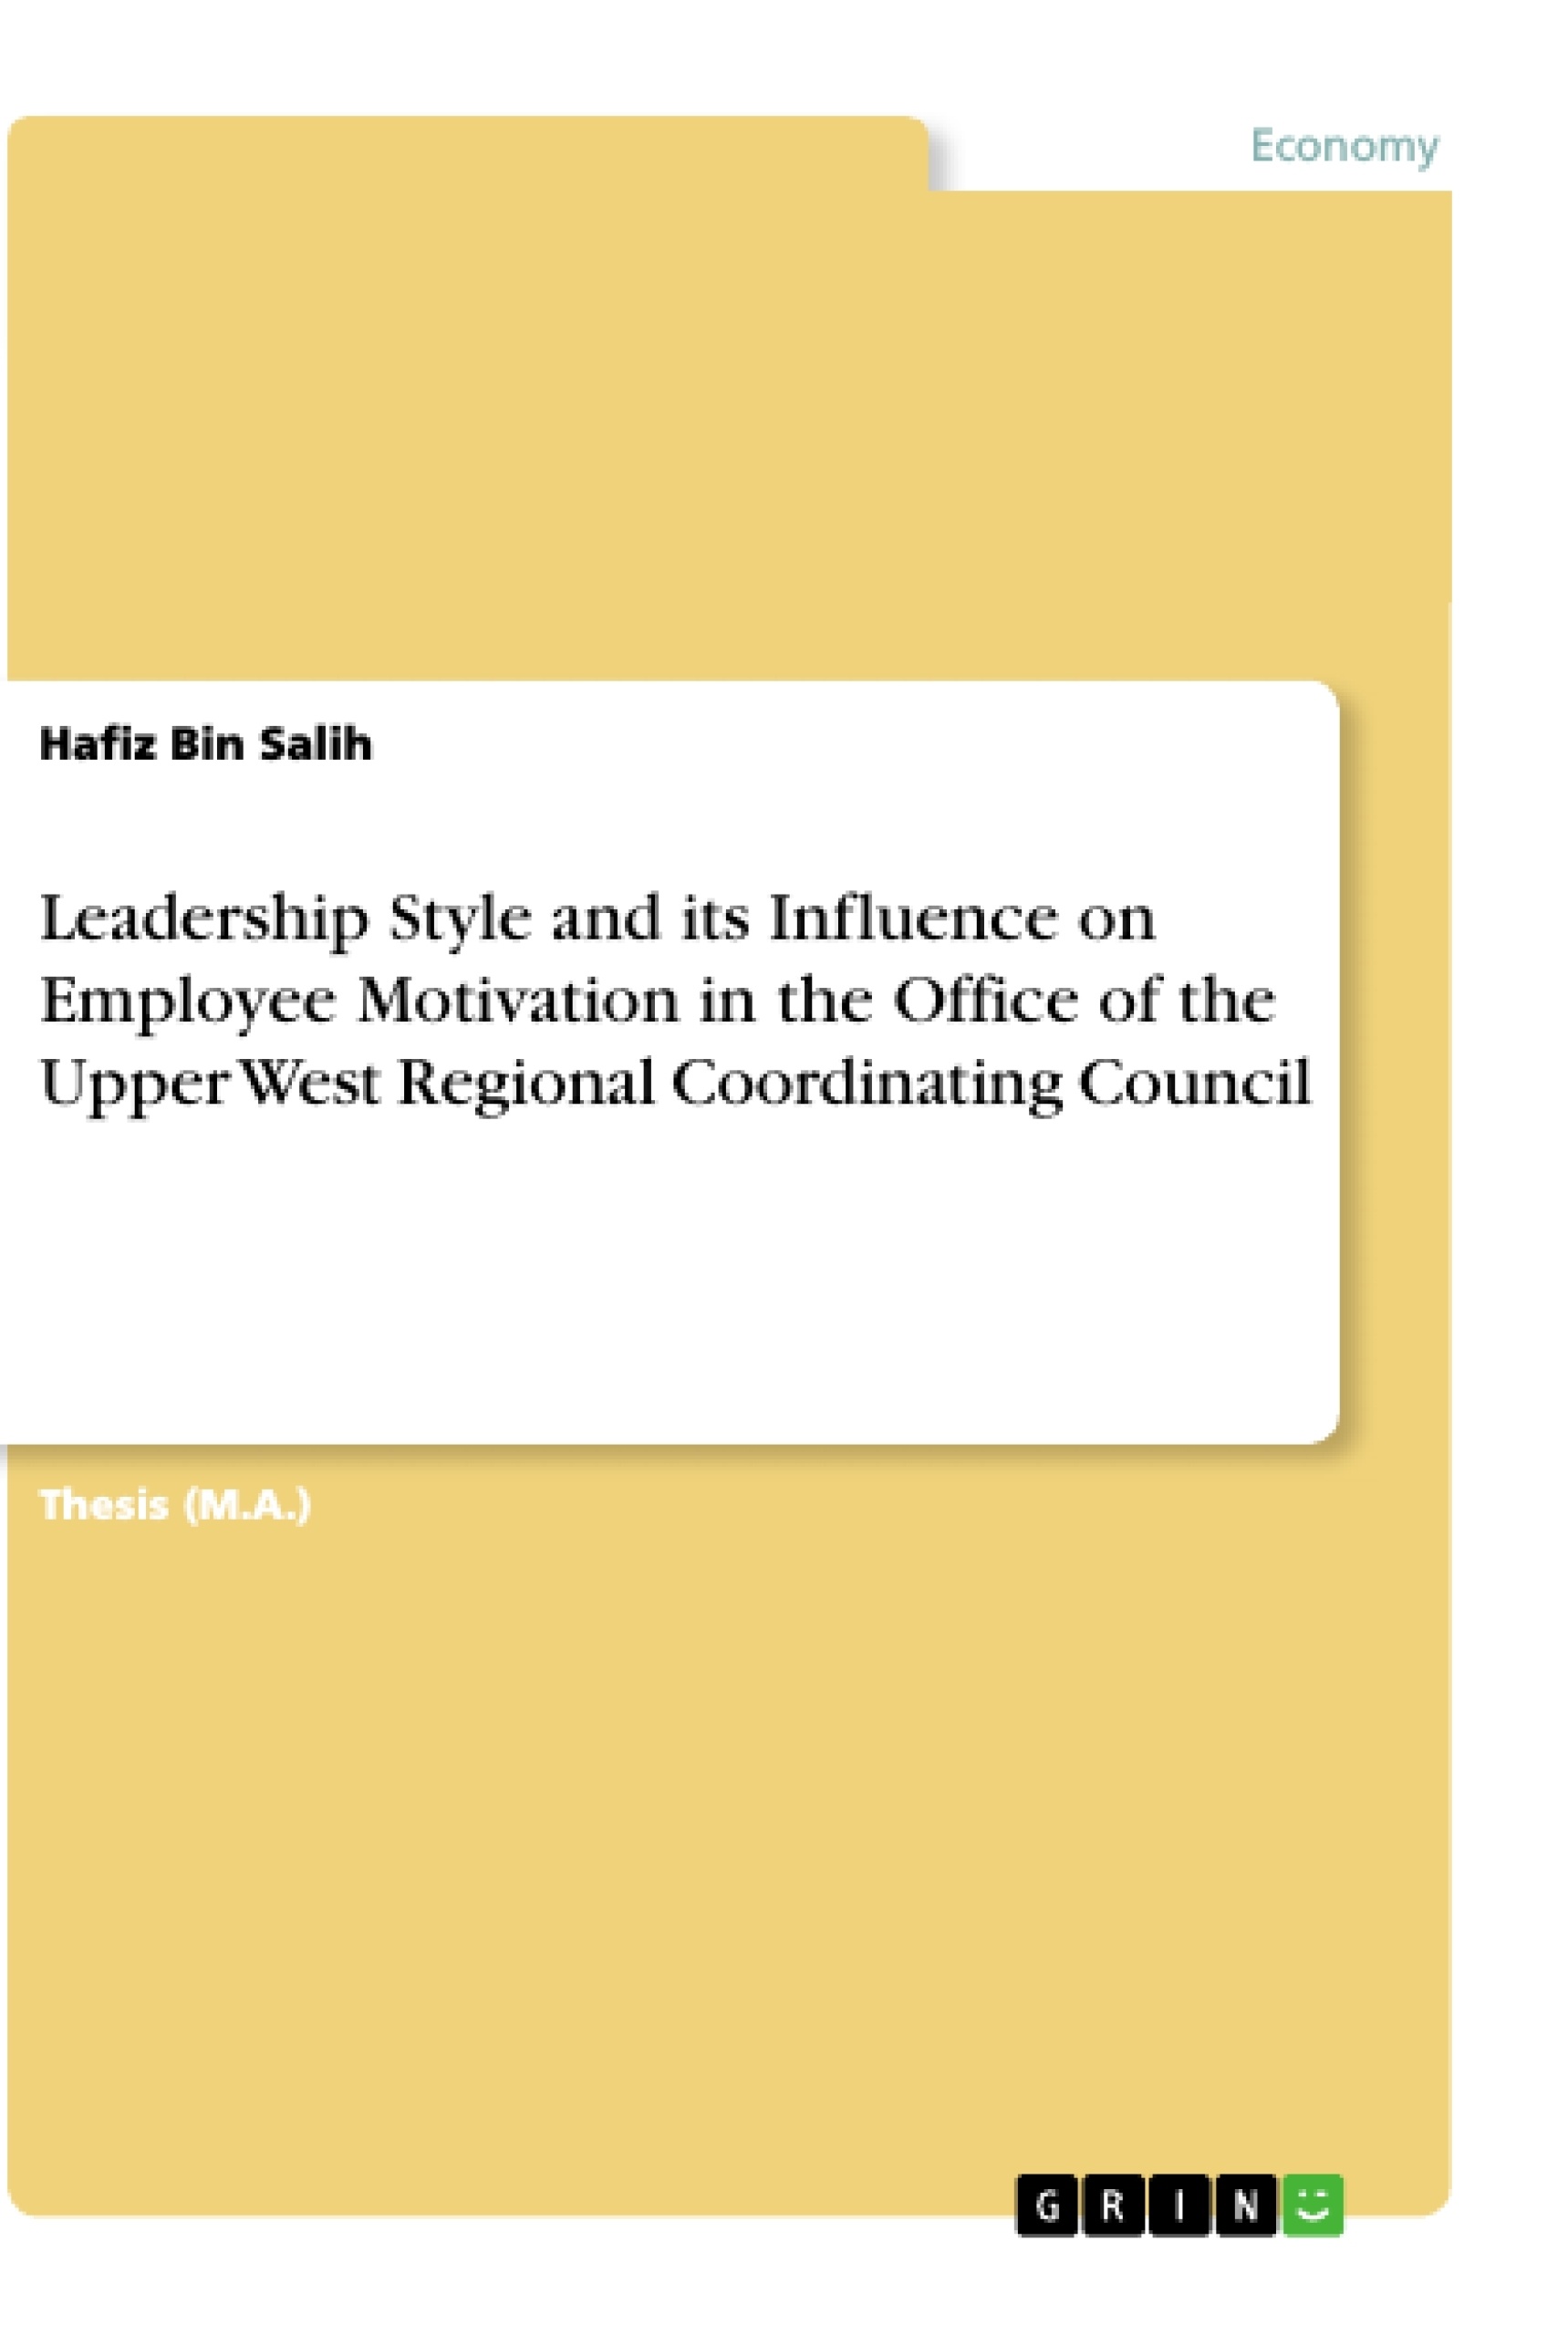 Title: Leadership Style and its Influence on Employee Motivation in the Office of the Upper West Regional Coordinating Council